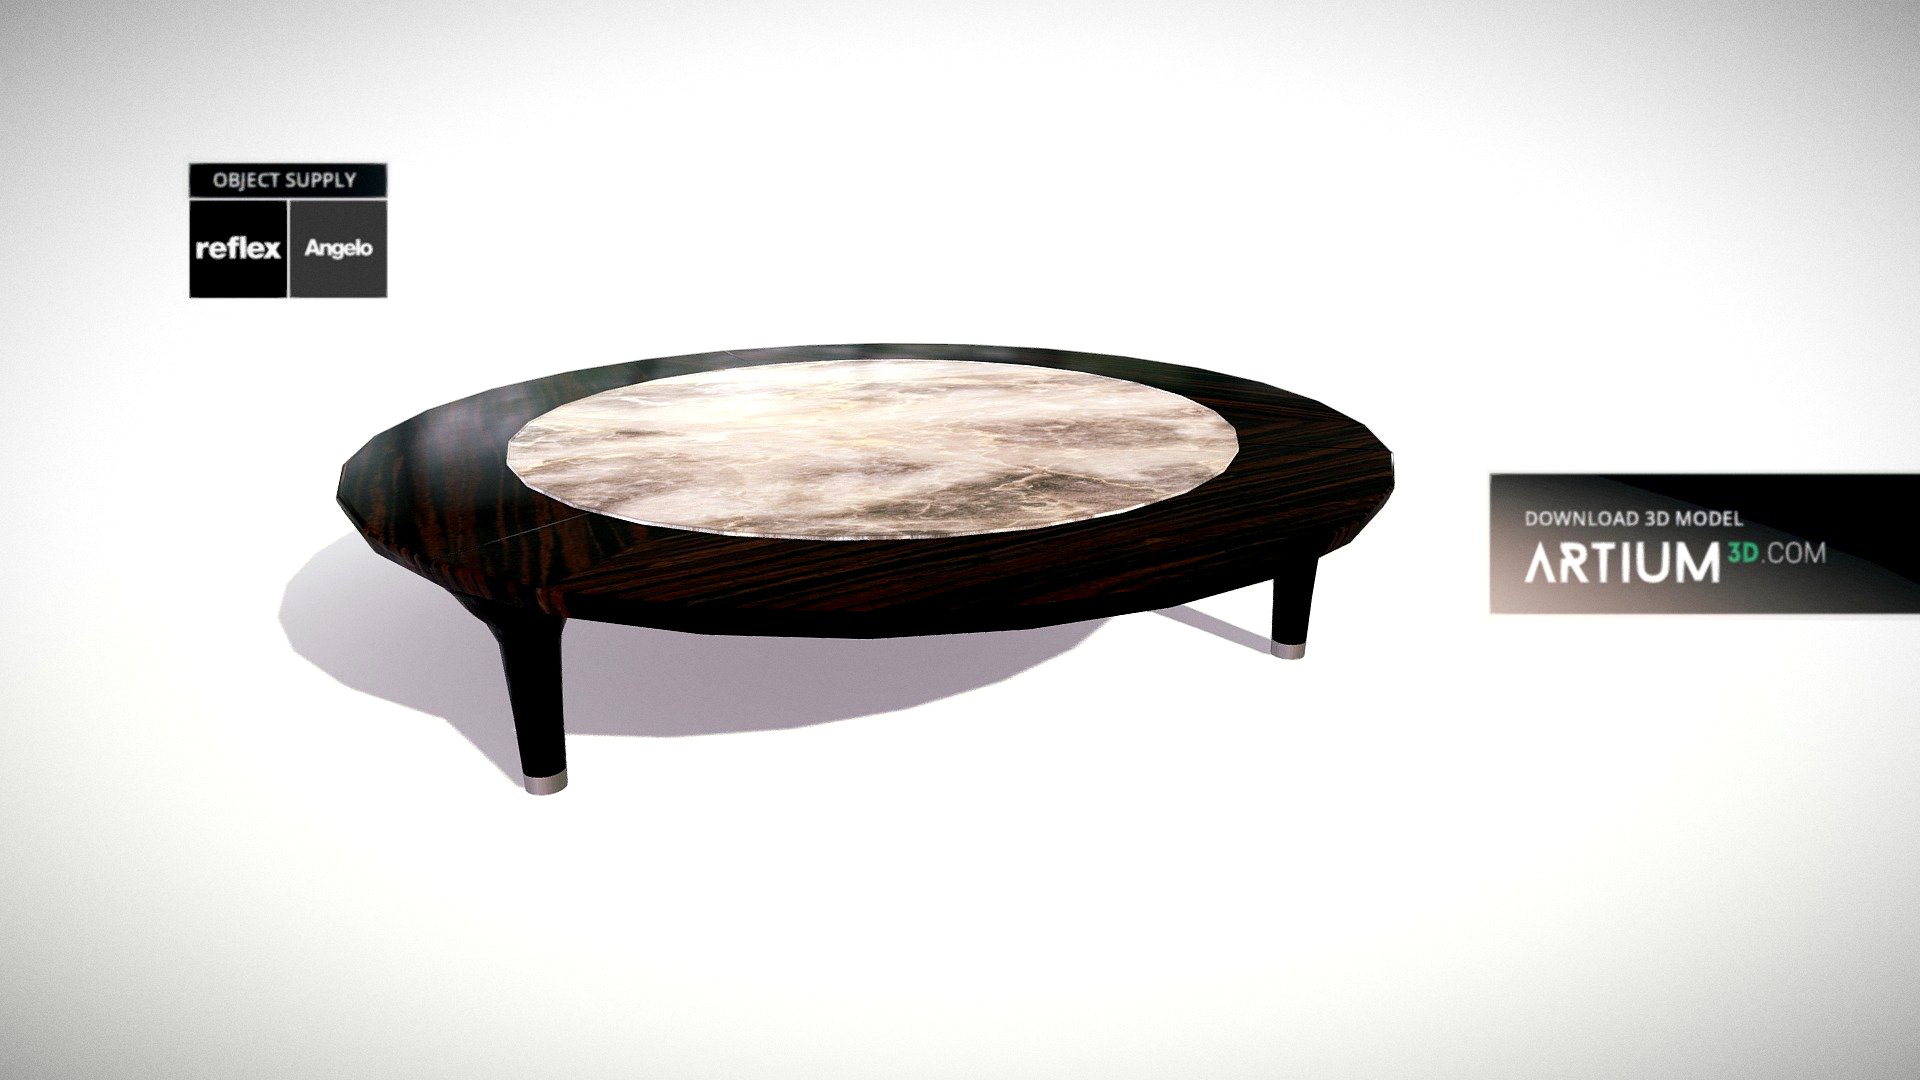 Coffee table ARK 40 from Reflex Angelo